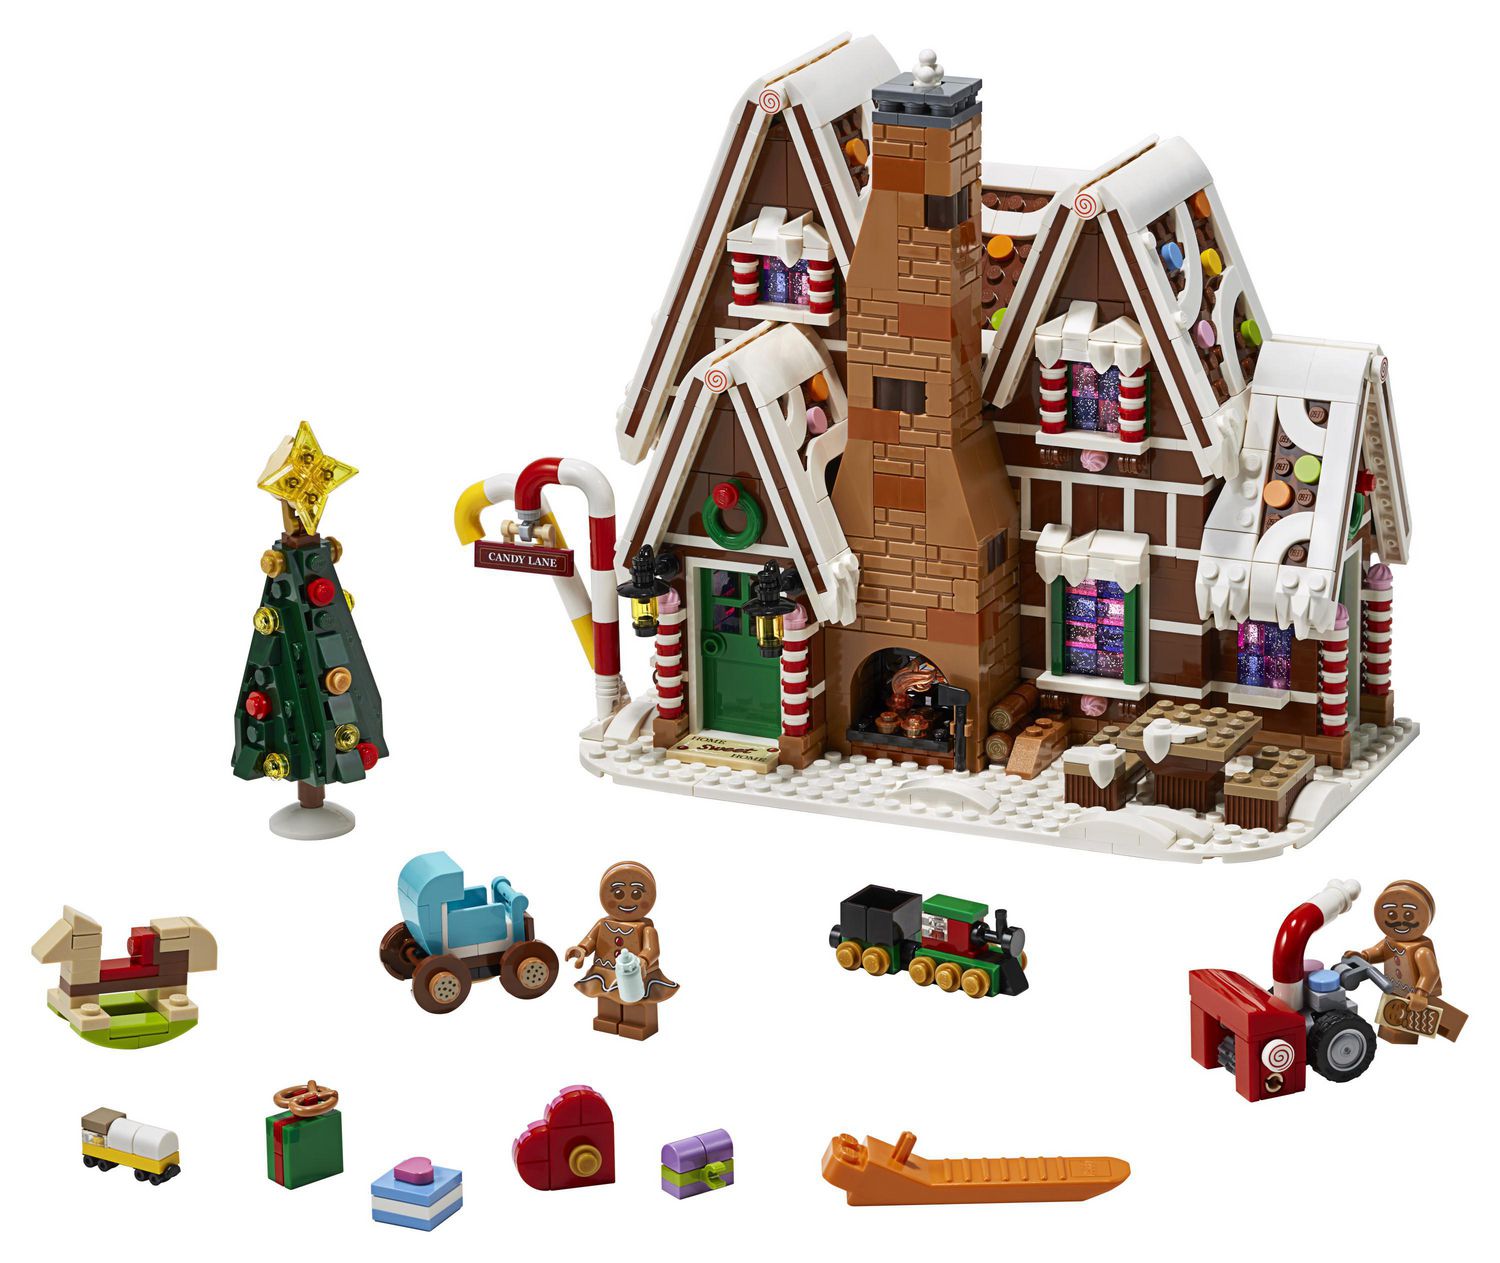 LEGO Creator Expert Gingerbread House 10267 Toy Building Kit (1477 Piece)